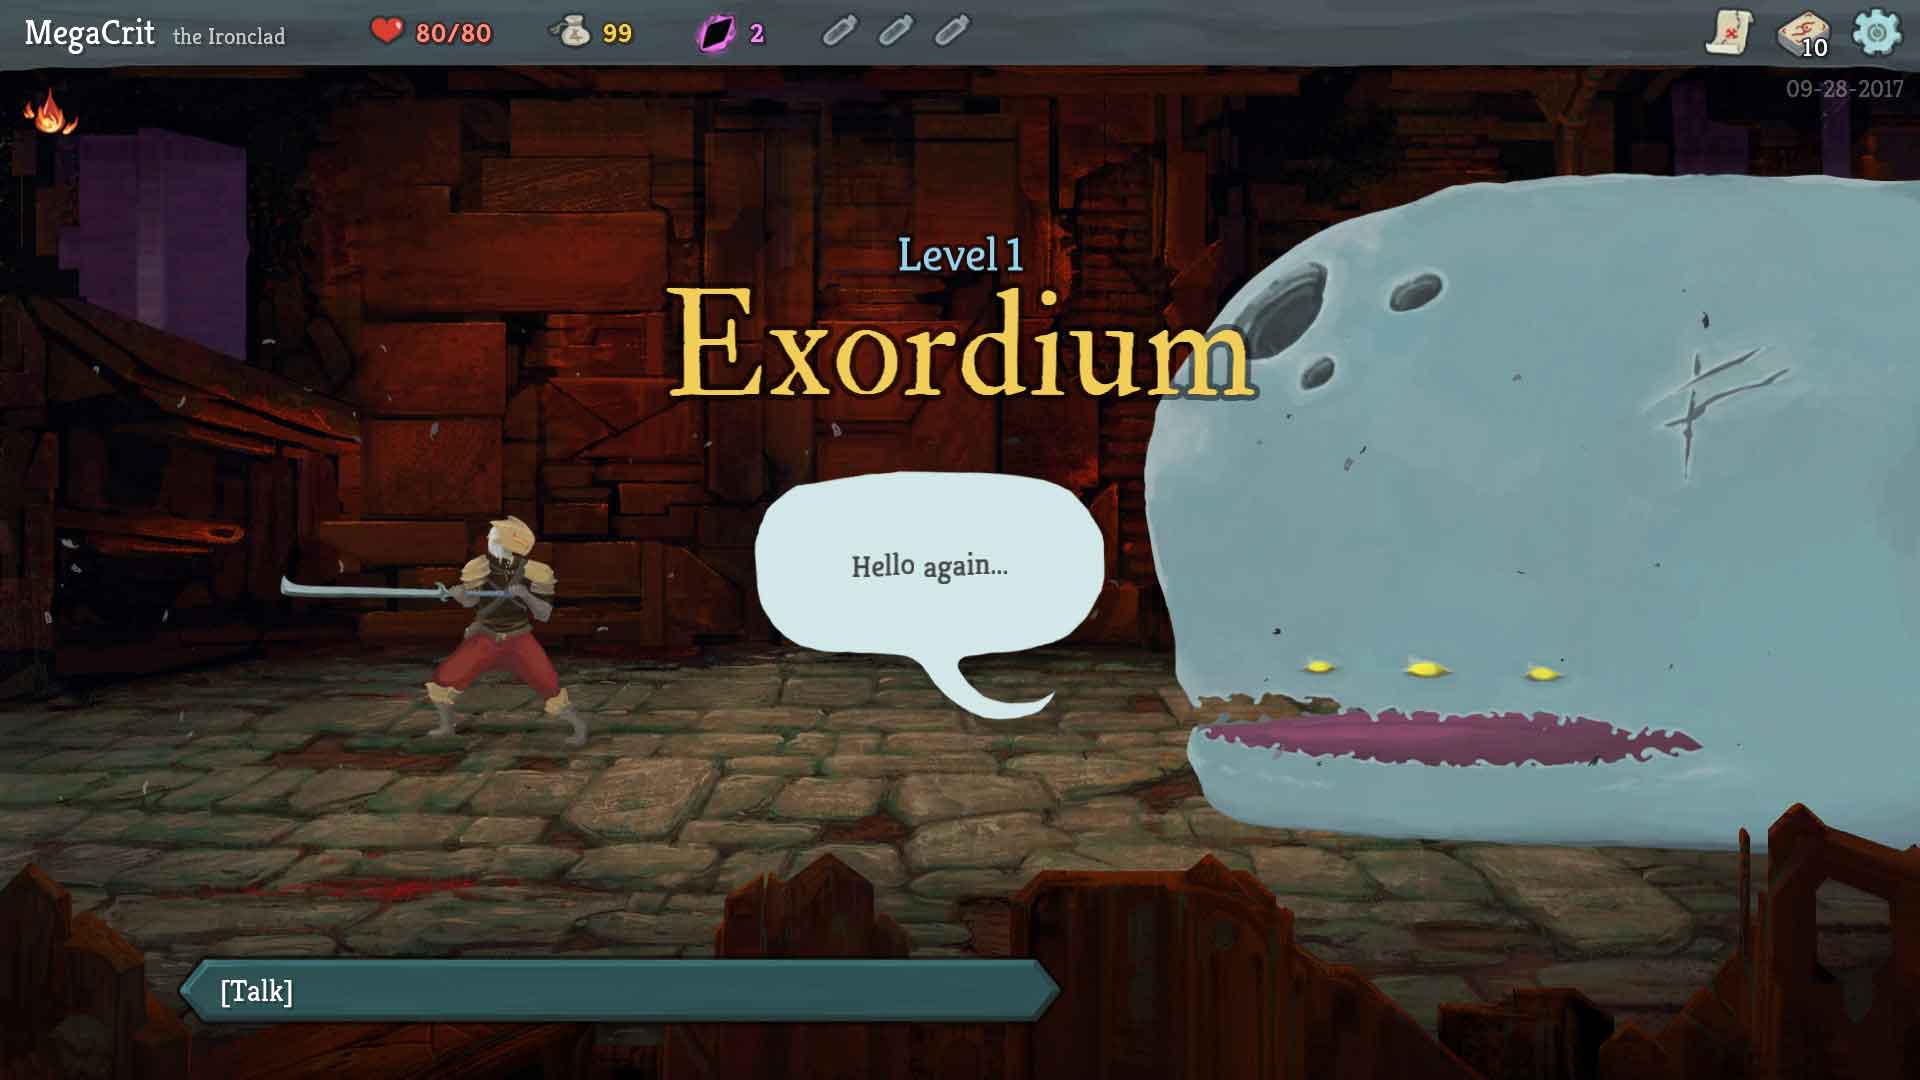 slay the spire free download linux